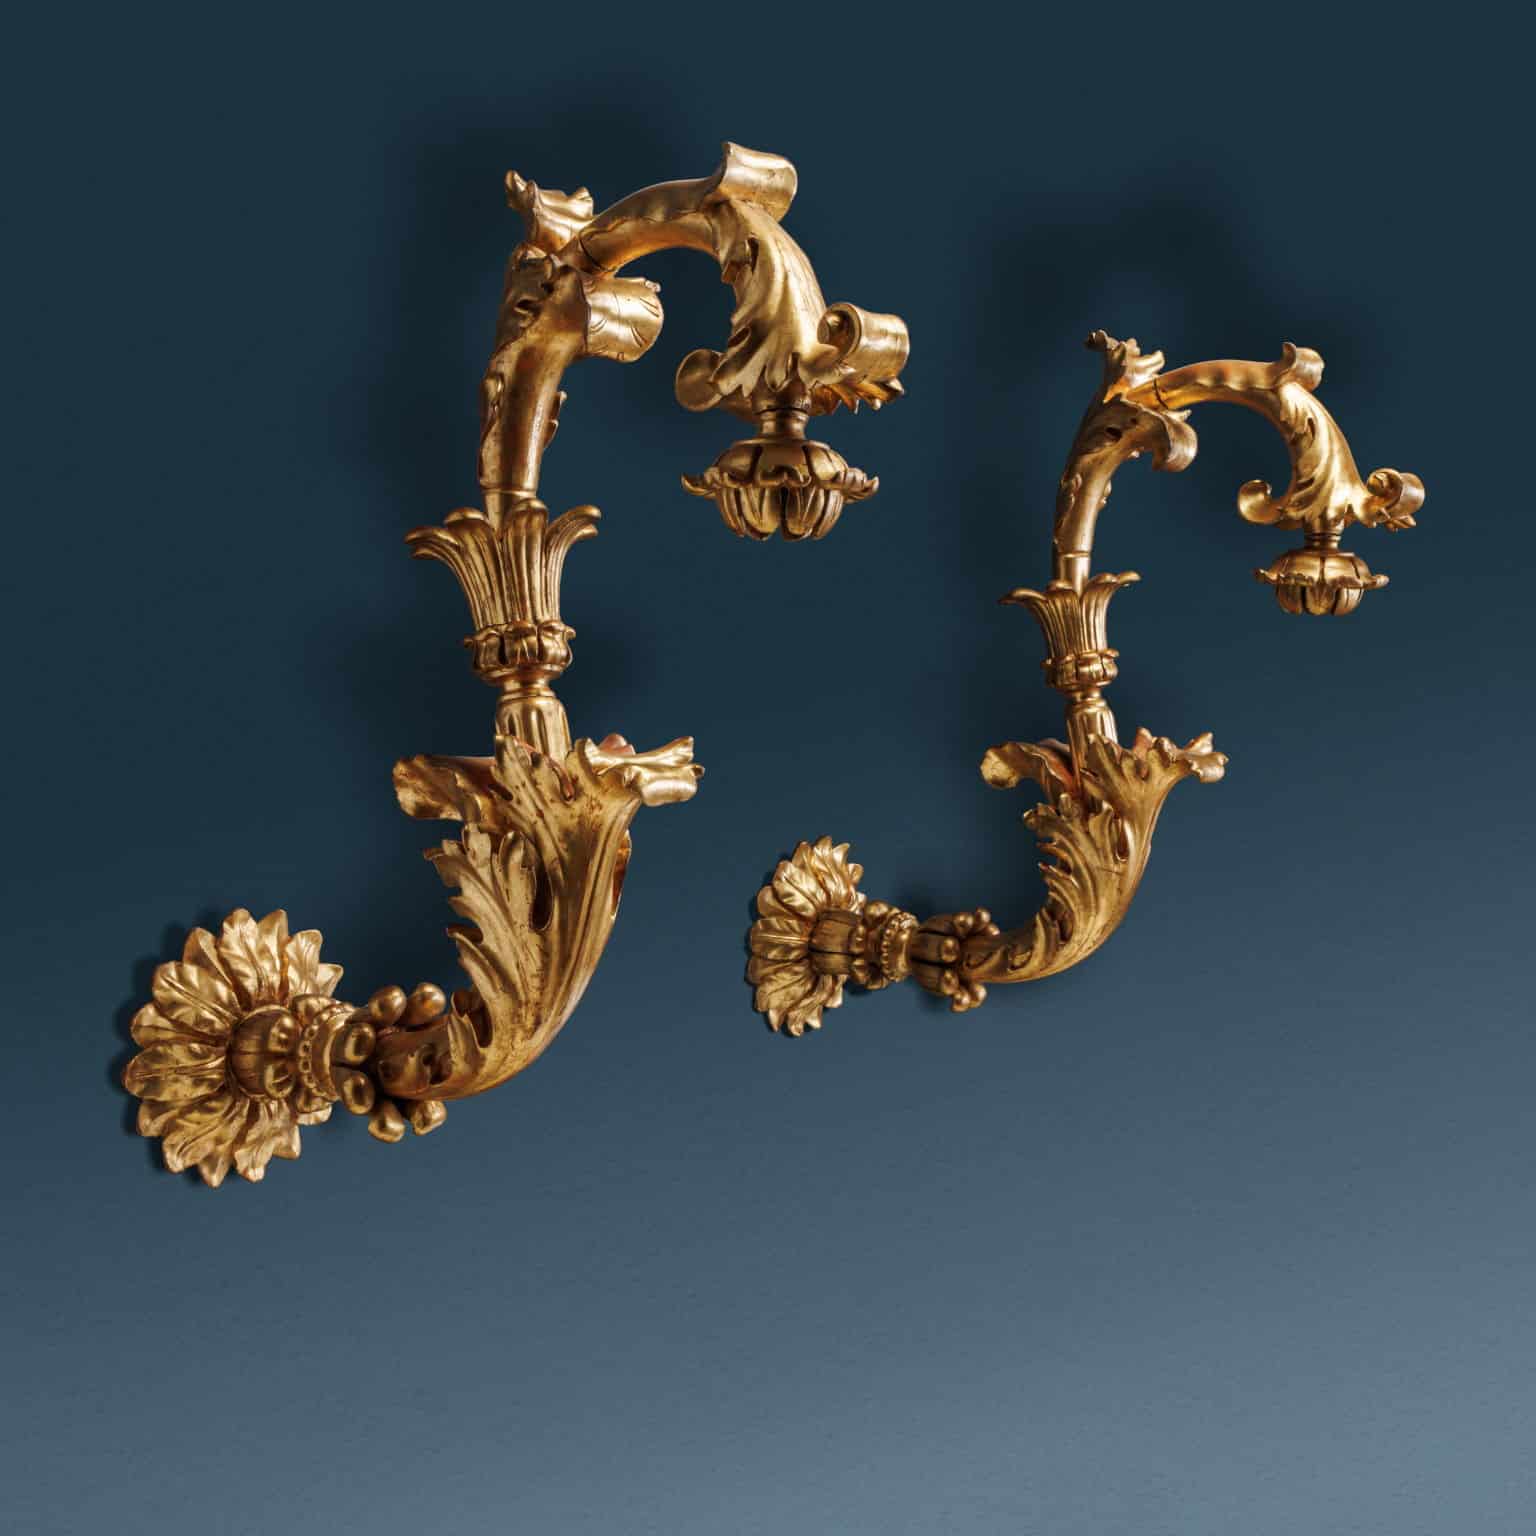 Pair of Lantern Stands. Lombardy, Early XVIII Century